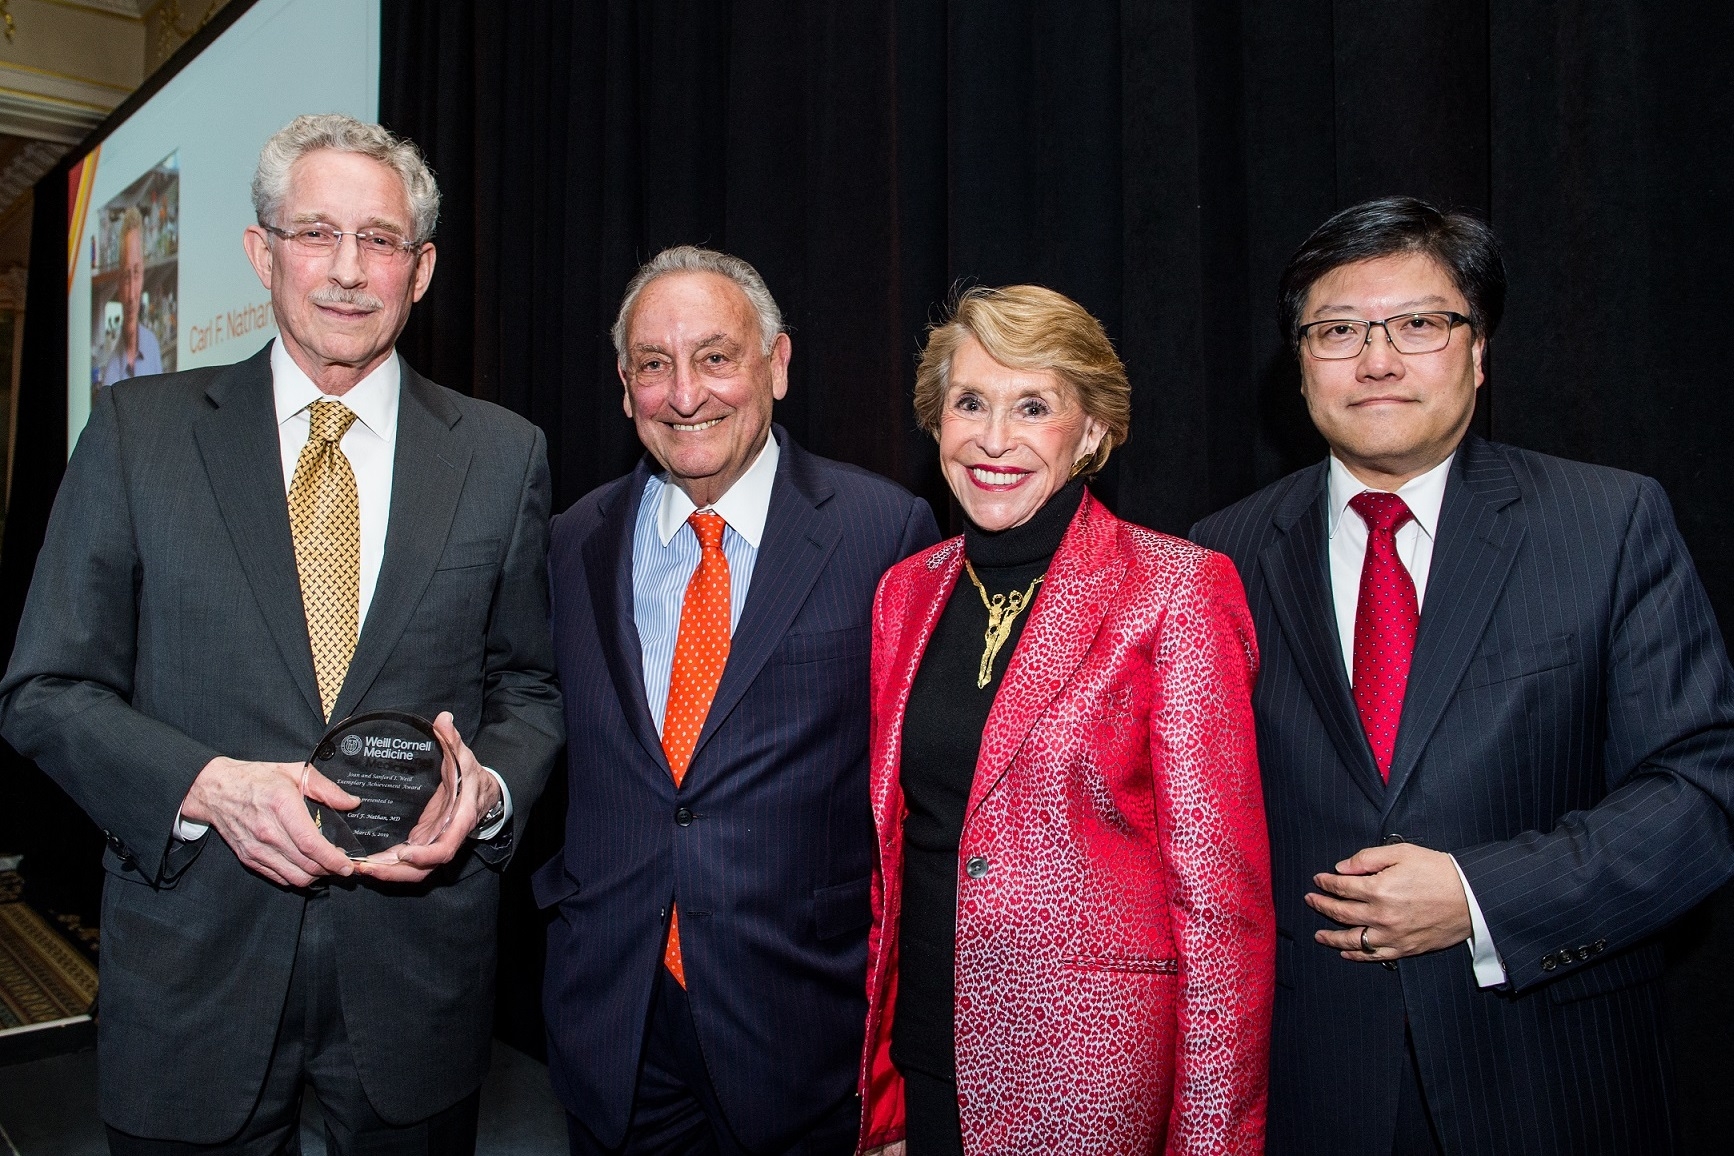 Dr. Carl Nathan, Sanford I. Weill, Joan Weill and Dr. Augustine M.K. Choi. Photo credit: Studio Brooke